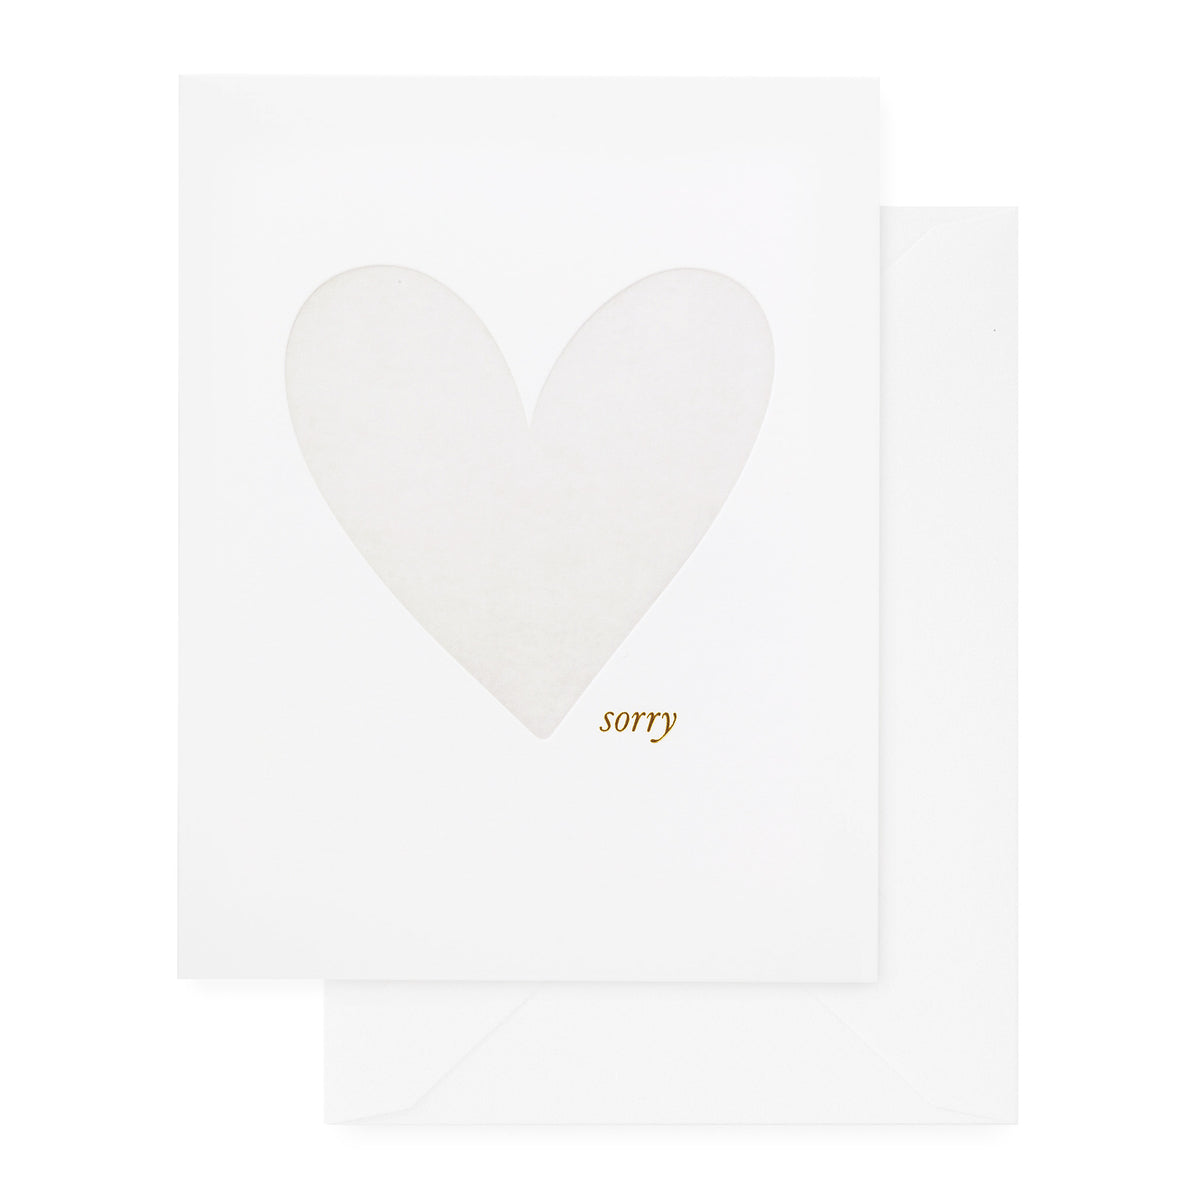 white card with grey heart and gold text, white envelope